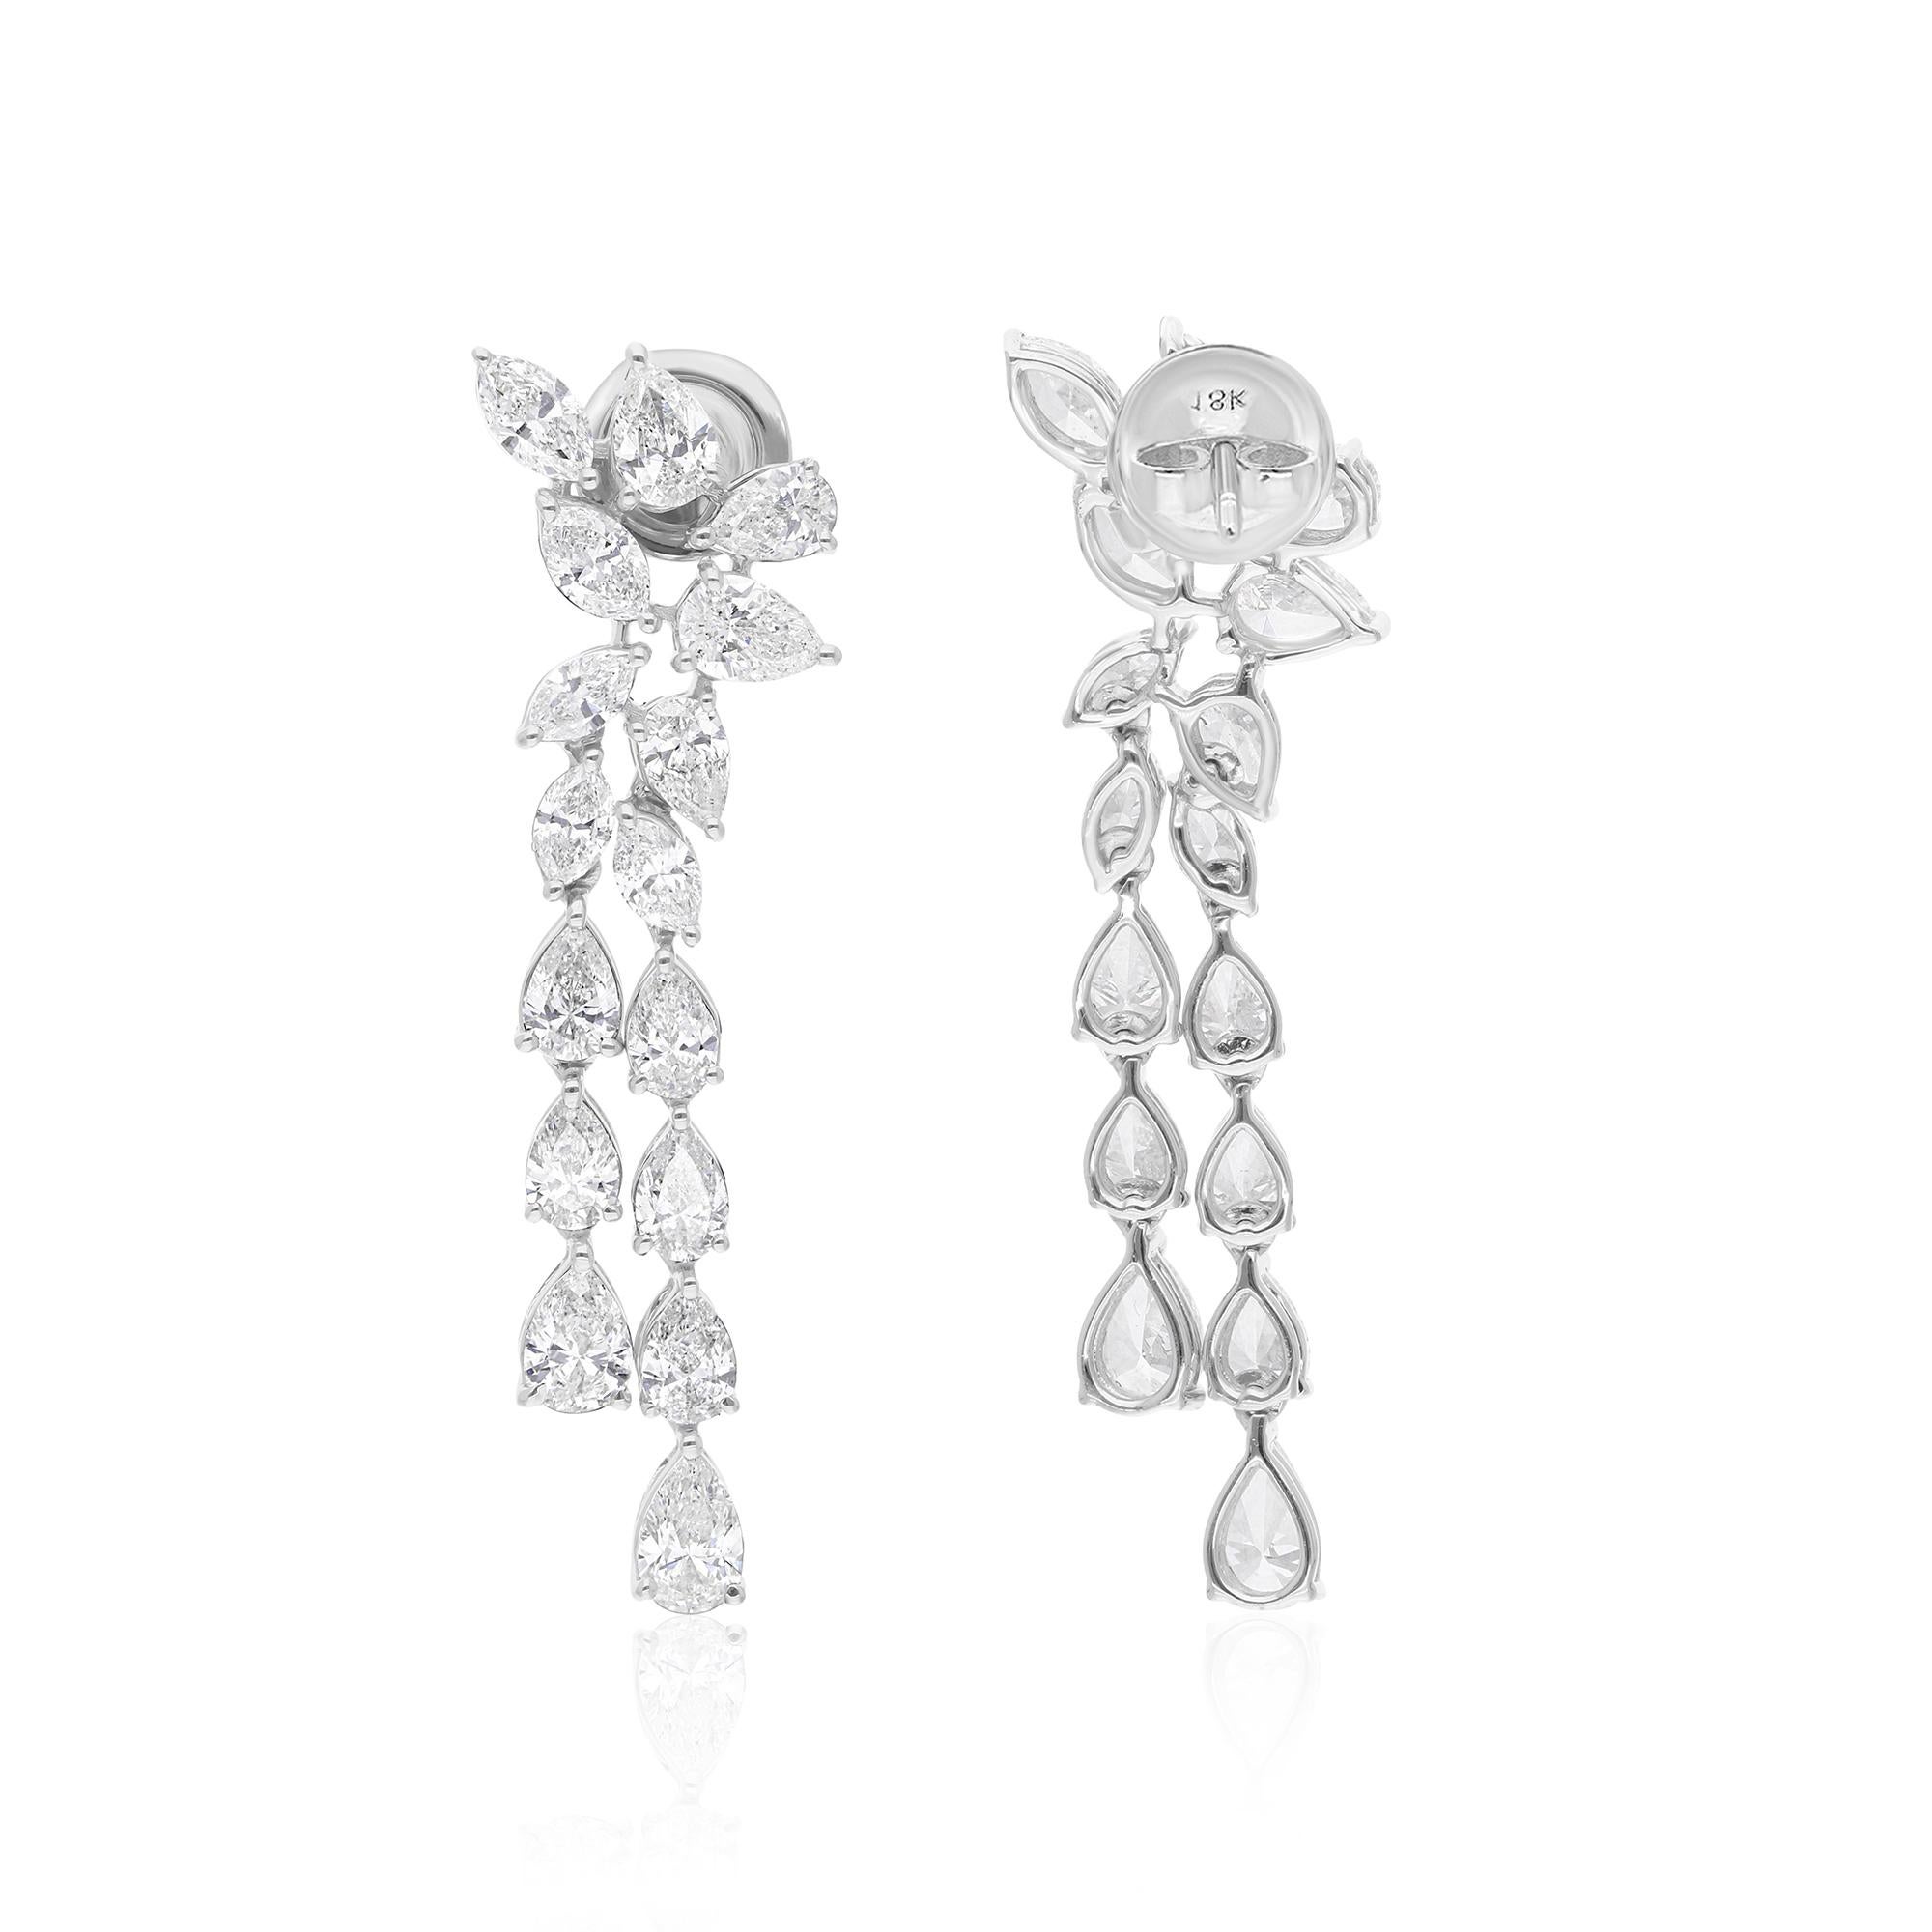 Modern Natural 5.18 Carat Pear & Marquise Diamond Earrings 14 Karat White Gold Jewelry For Sale